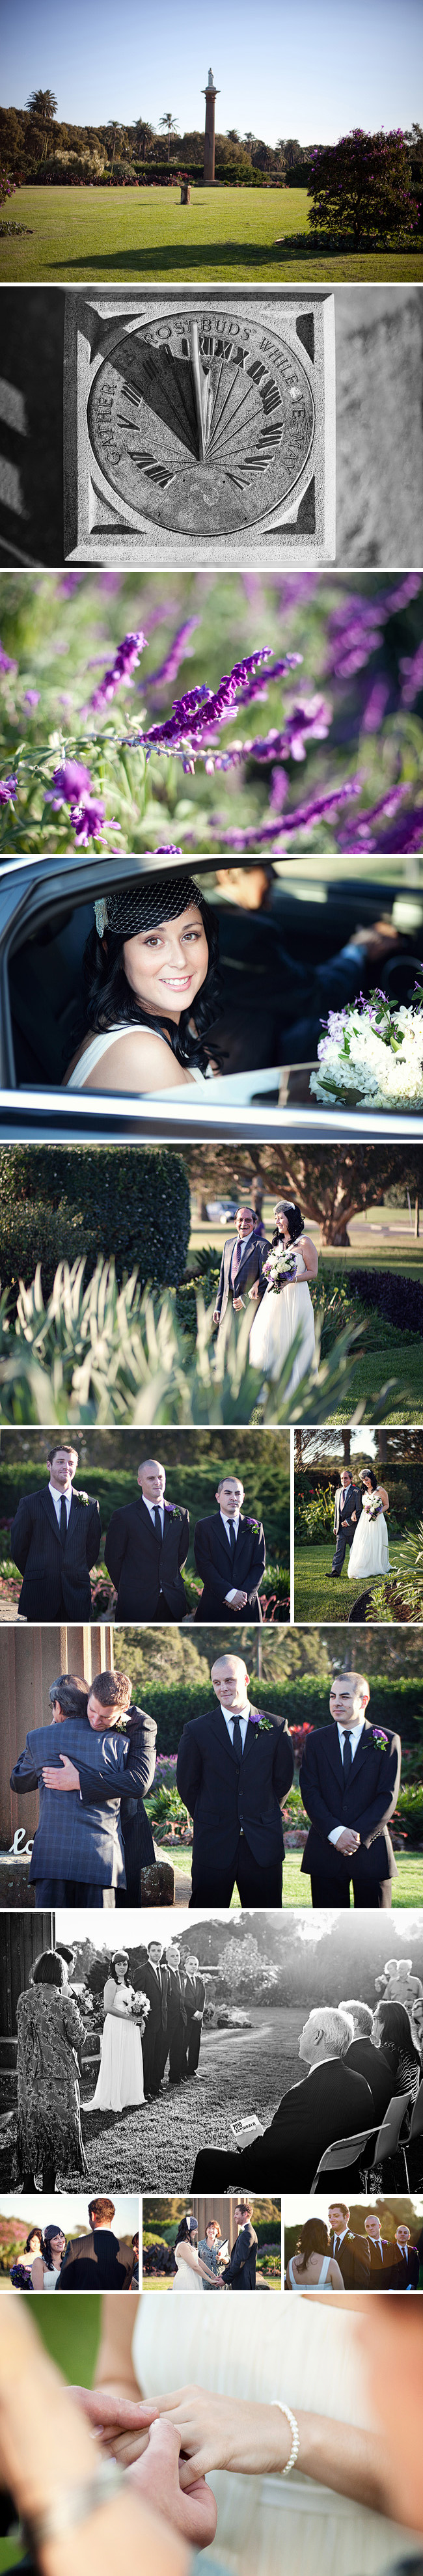 Centennial Park Wedding Photography - The Bride's Arrival at The Ceremony